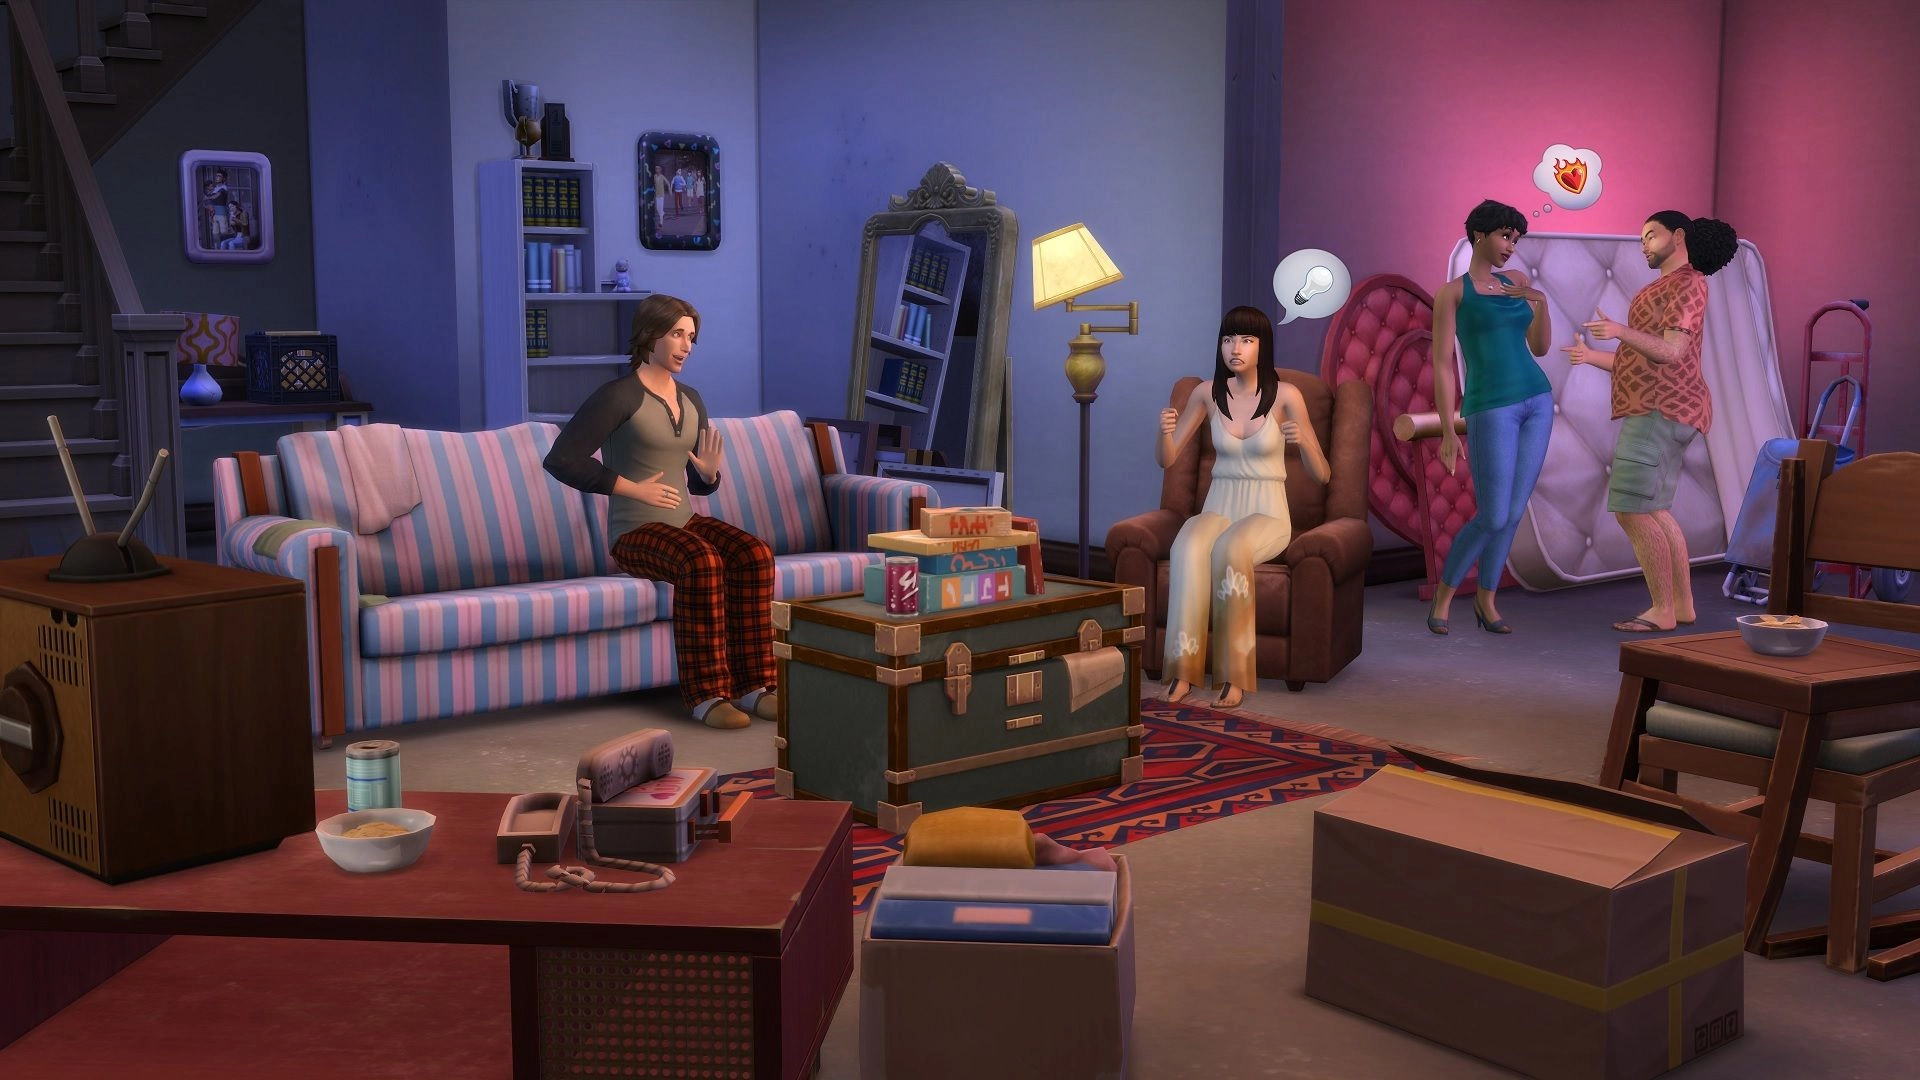 Sims 4 Expansion Leak Suggests Introduction of Rental Properties